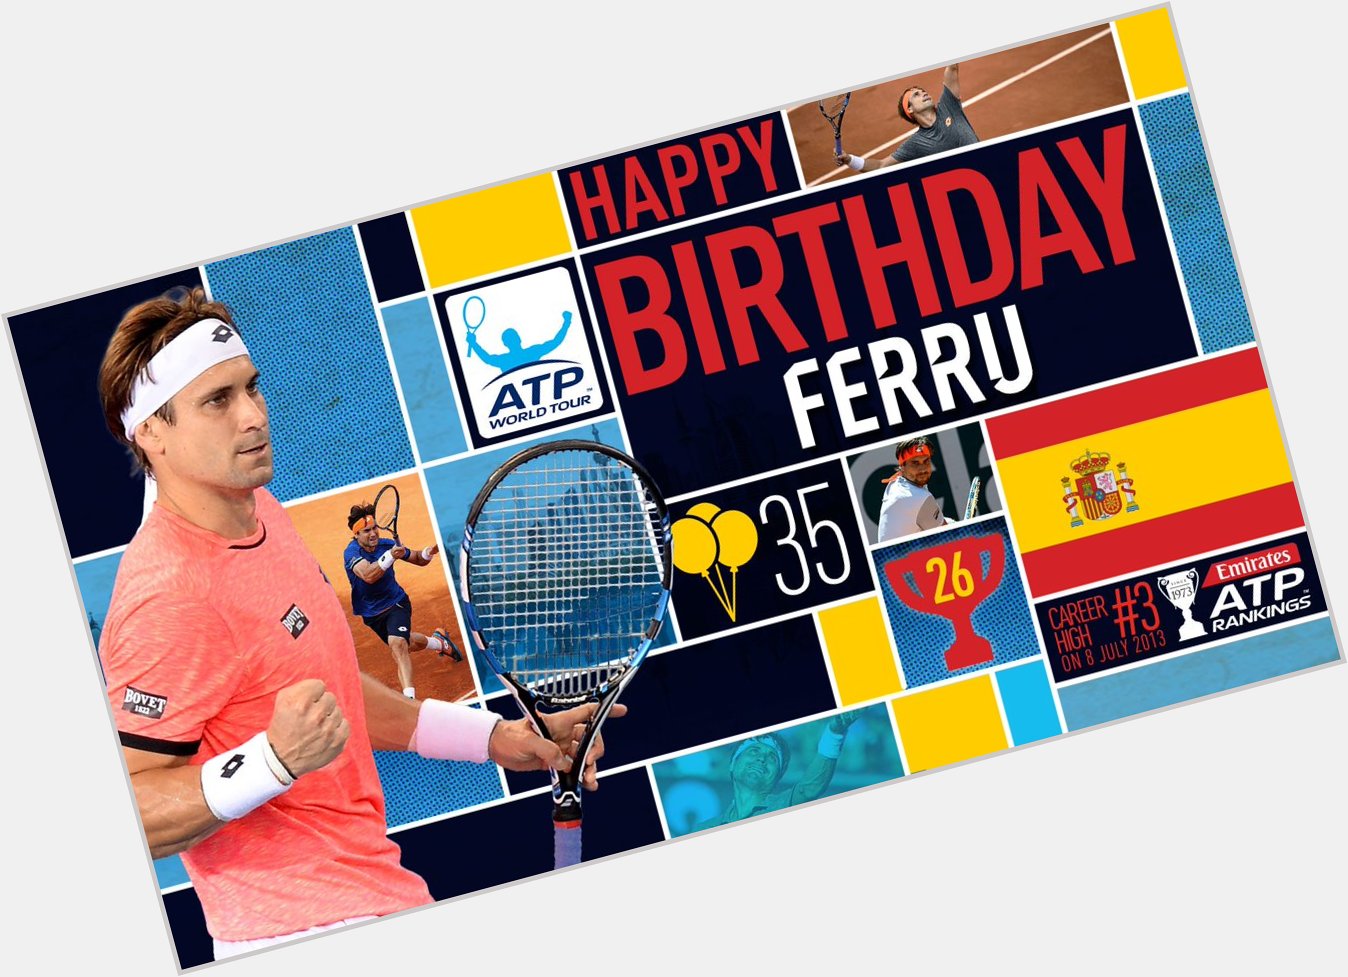  another top Spanish player happy birthday to david ferrer 